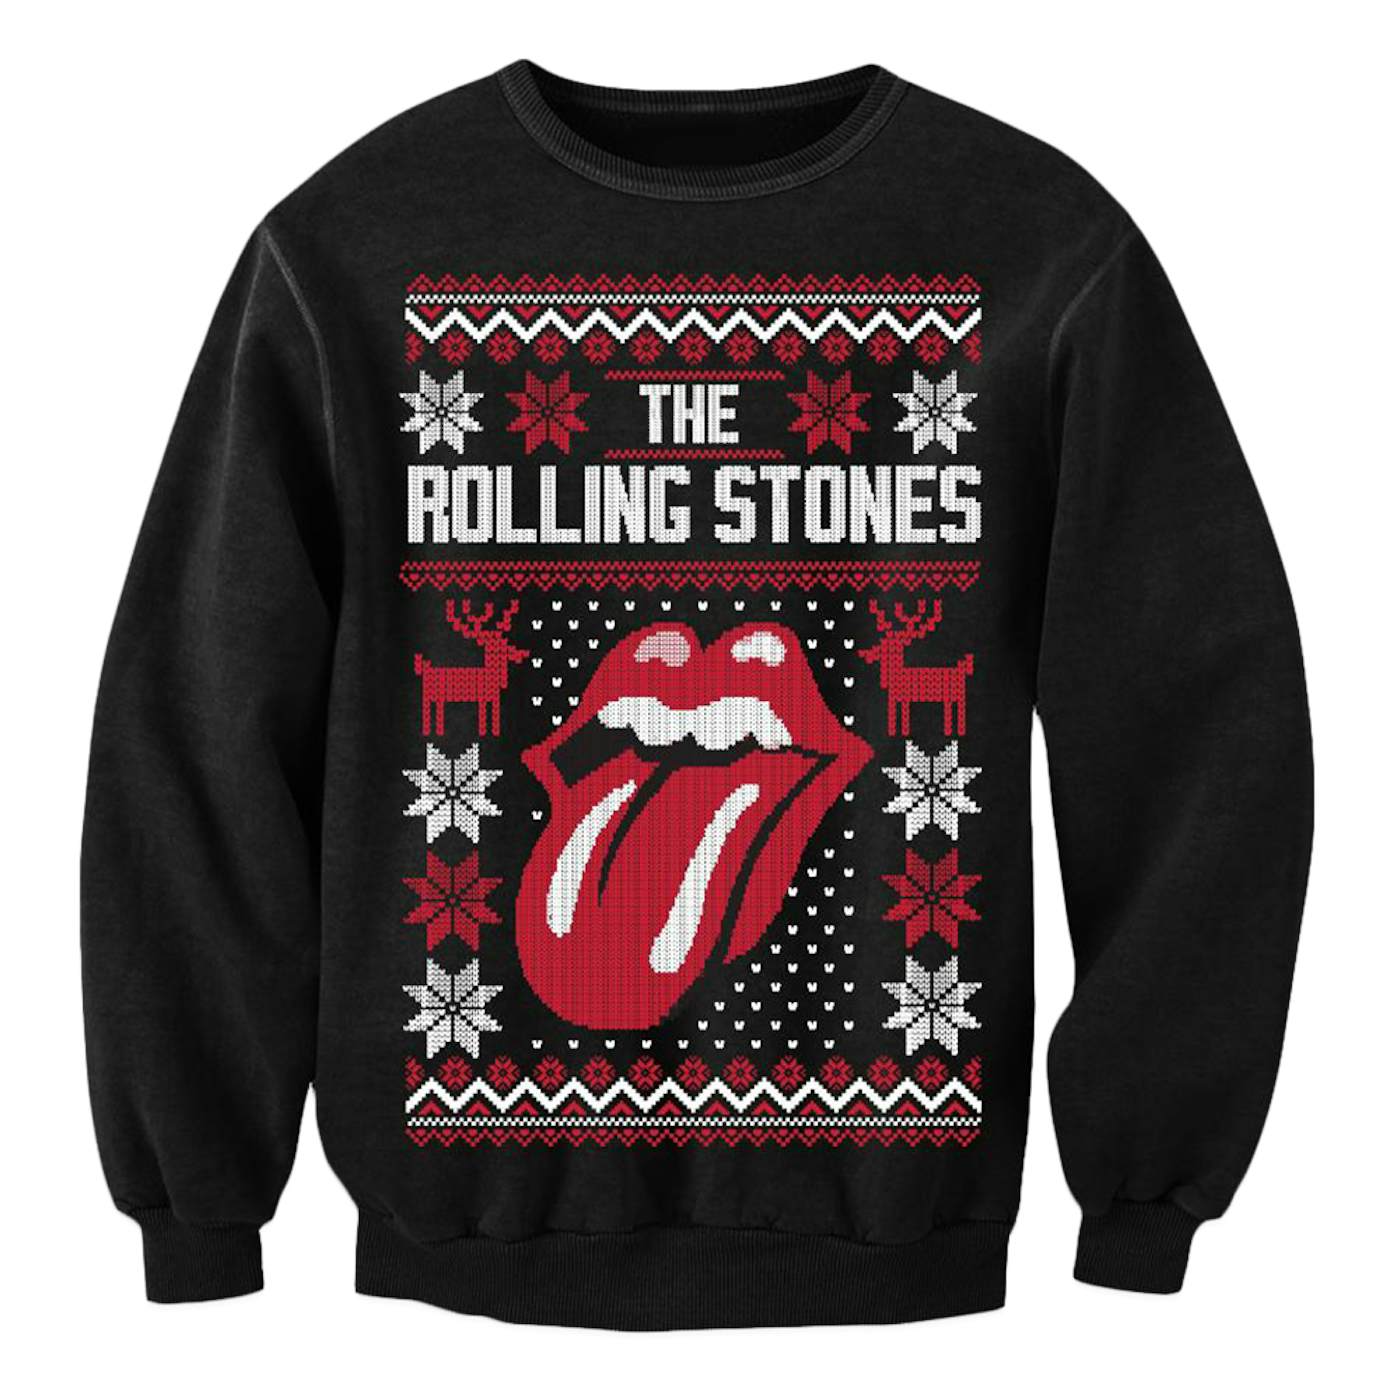 The Rolling StonesHoliday Sweater